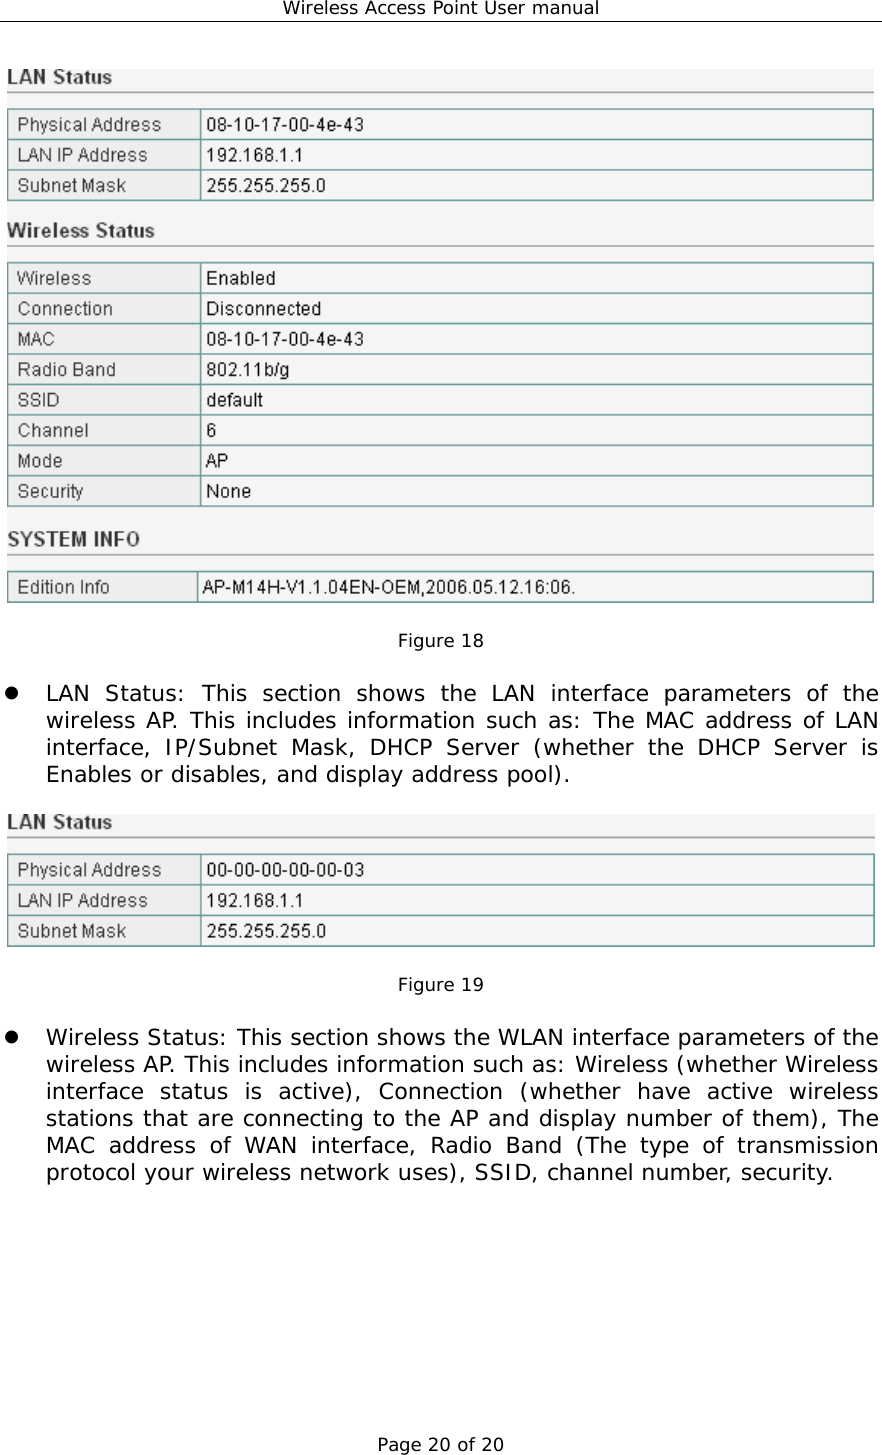 Wireless Access Point User manual Page 20 of 20   Figure 18    LAN Status: This section shows the LAN interface parameters of the wireless AP. This includes information such as: The MAC address of LAN interface, IP/Subnet Mask, DHCP Server (whether the DHCP Server is Enables or disables, and display address pool).    Figure 19    Wireless Status: This section shows the WLAN interface parameters of the wireless AP. This includes information such as: Wireless (whether Wireless interface status is active), Connection (whether have active wireless stations that are connecting to the AP and display number of them), The MAC address of WAN interface, Radio Band (The type of transmission protocol your wireless network uses), SSID, channel number, security.  